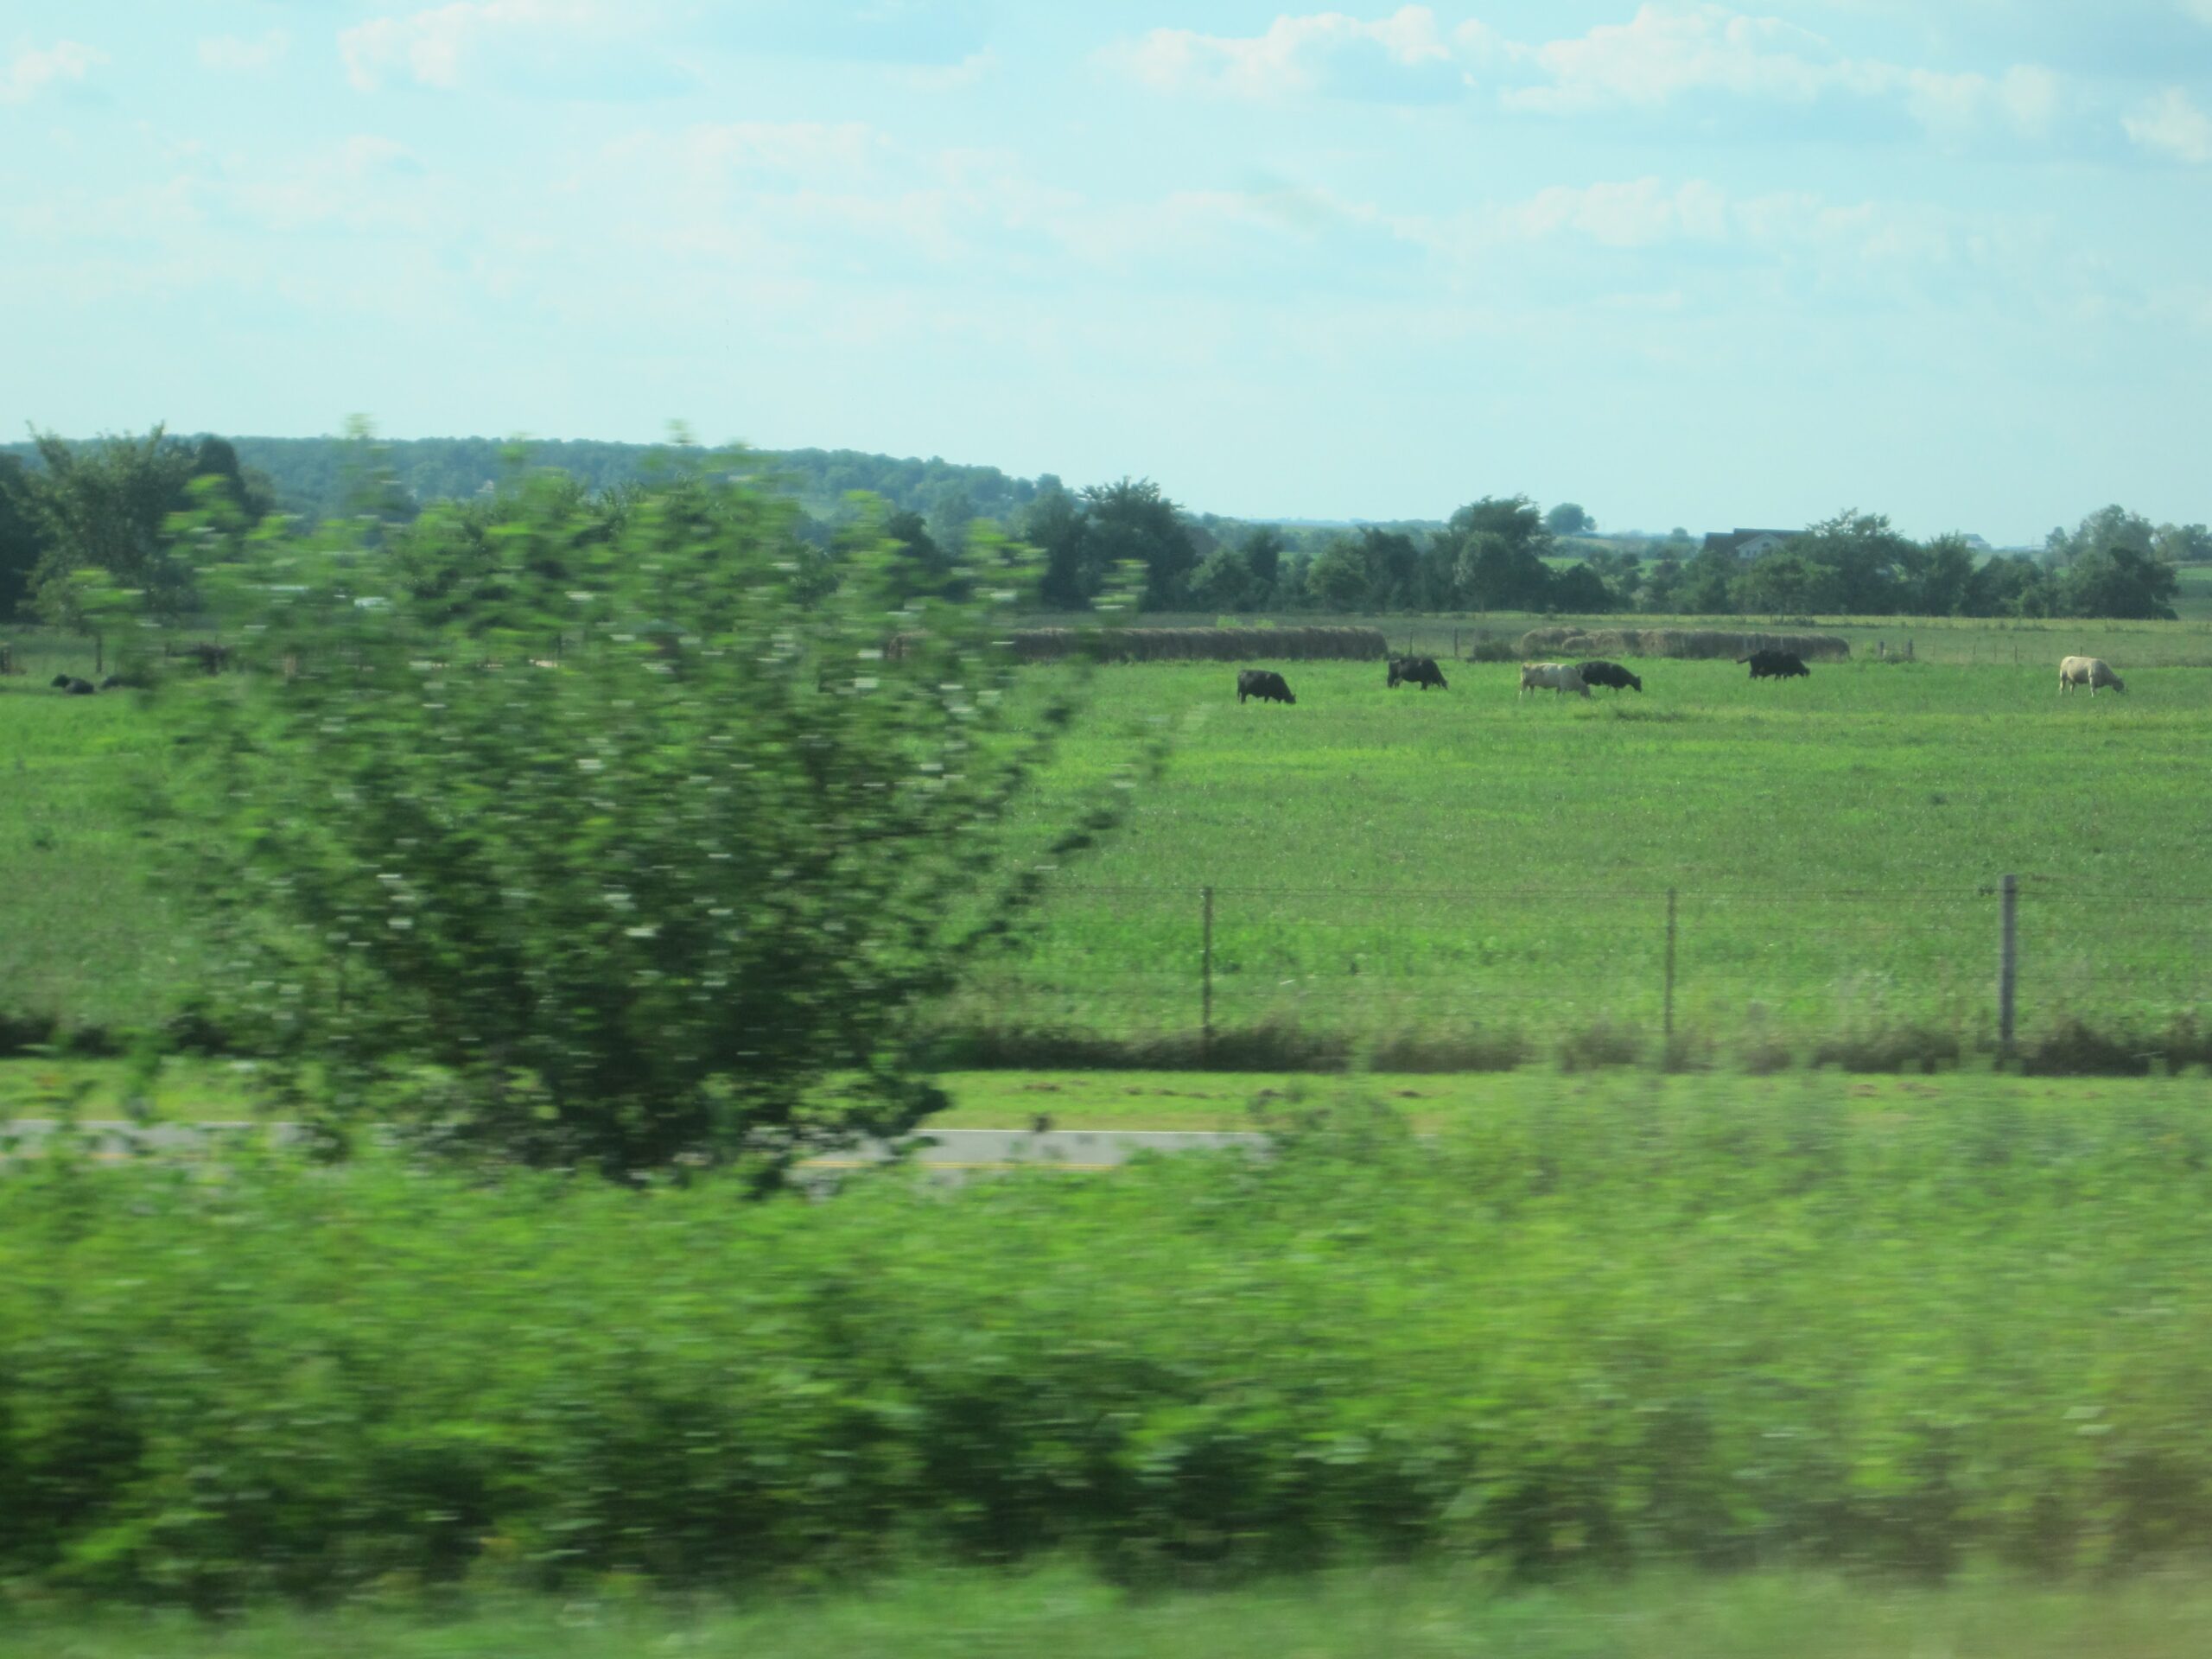 A picture of midwest dairy cows. This is where dairy feta would come from.